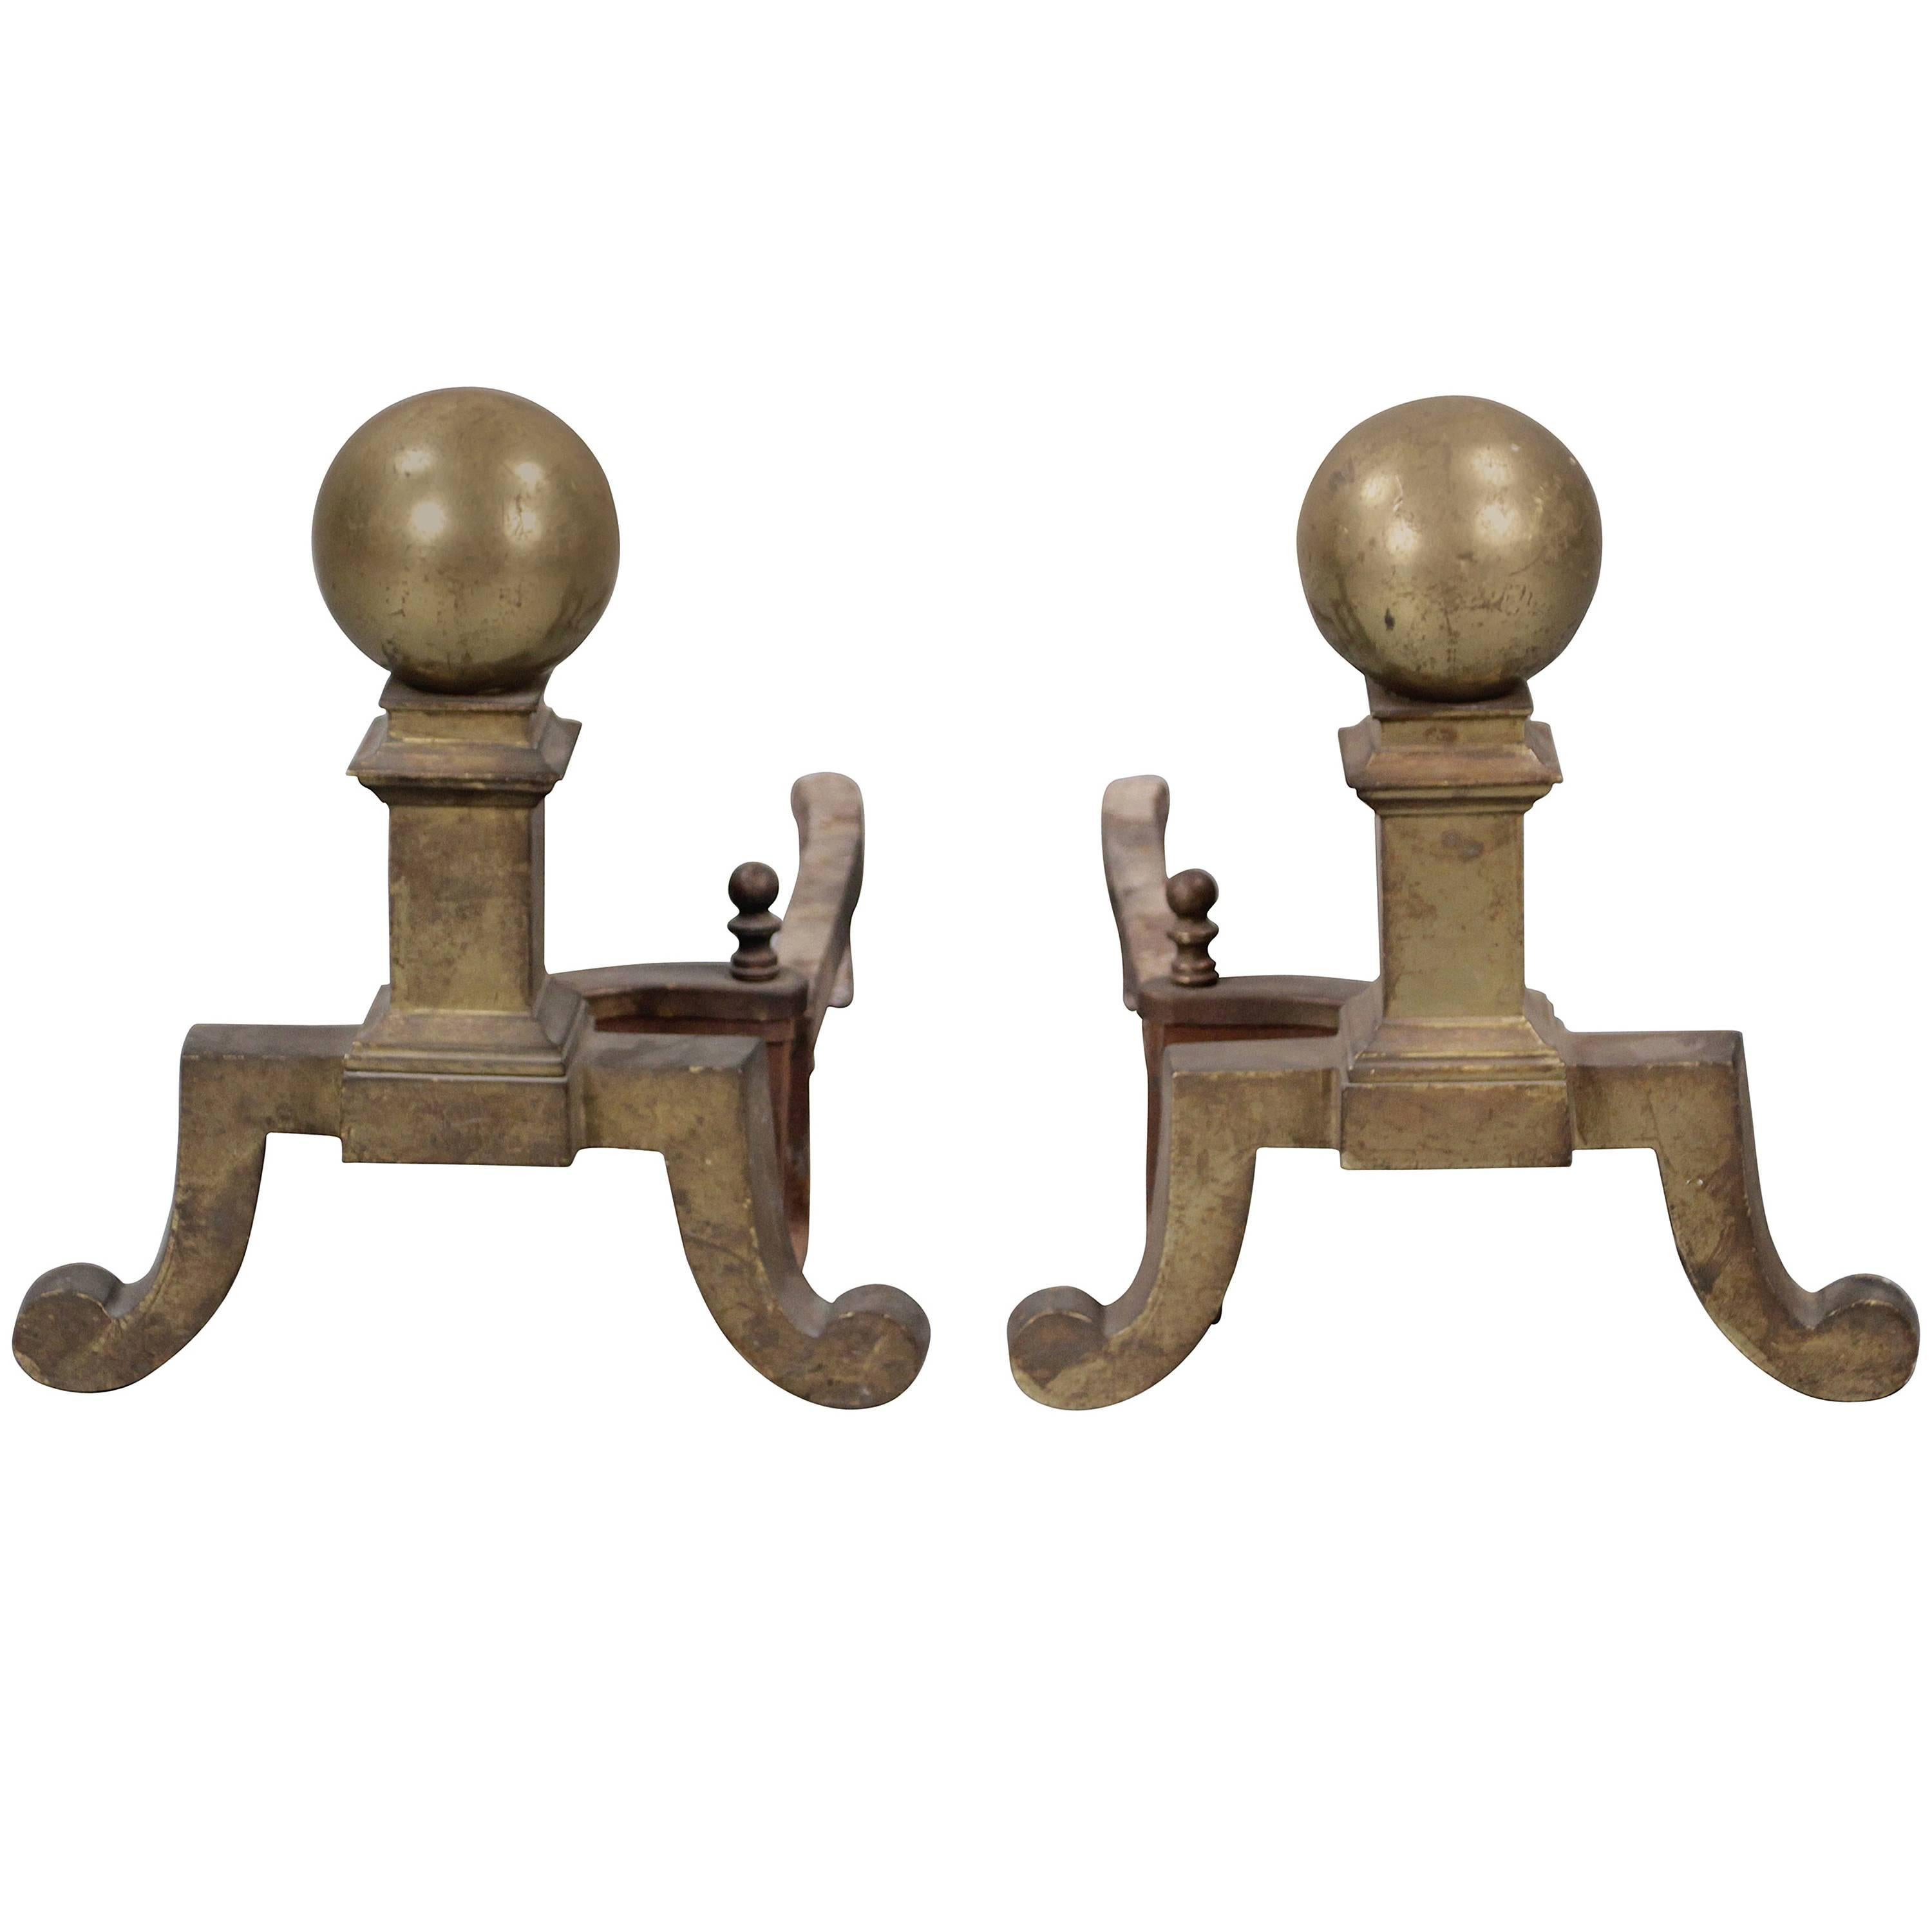 Antique Pair of Small Scale Andirons For Sale